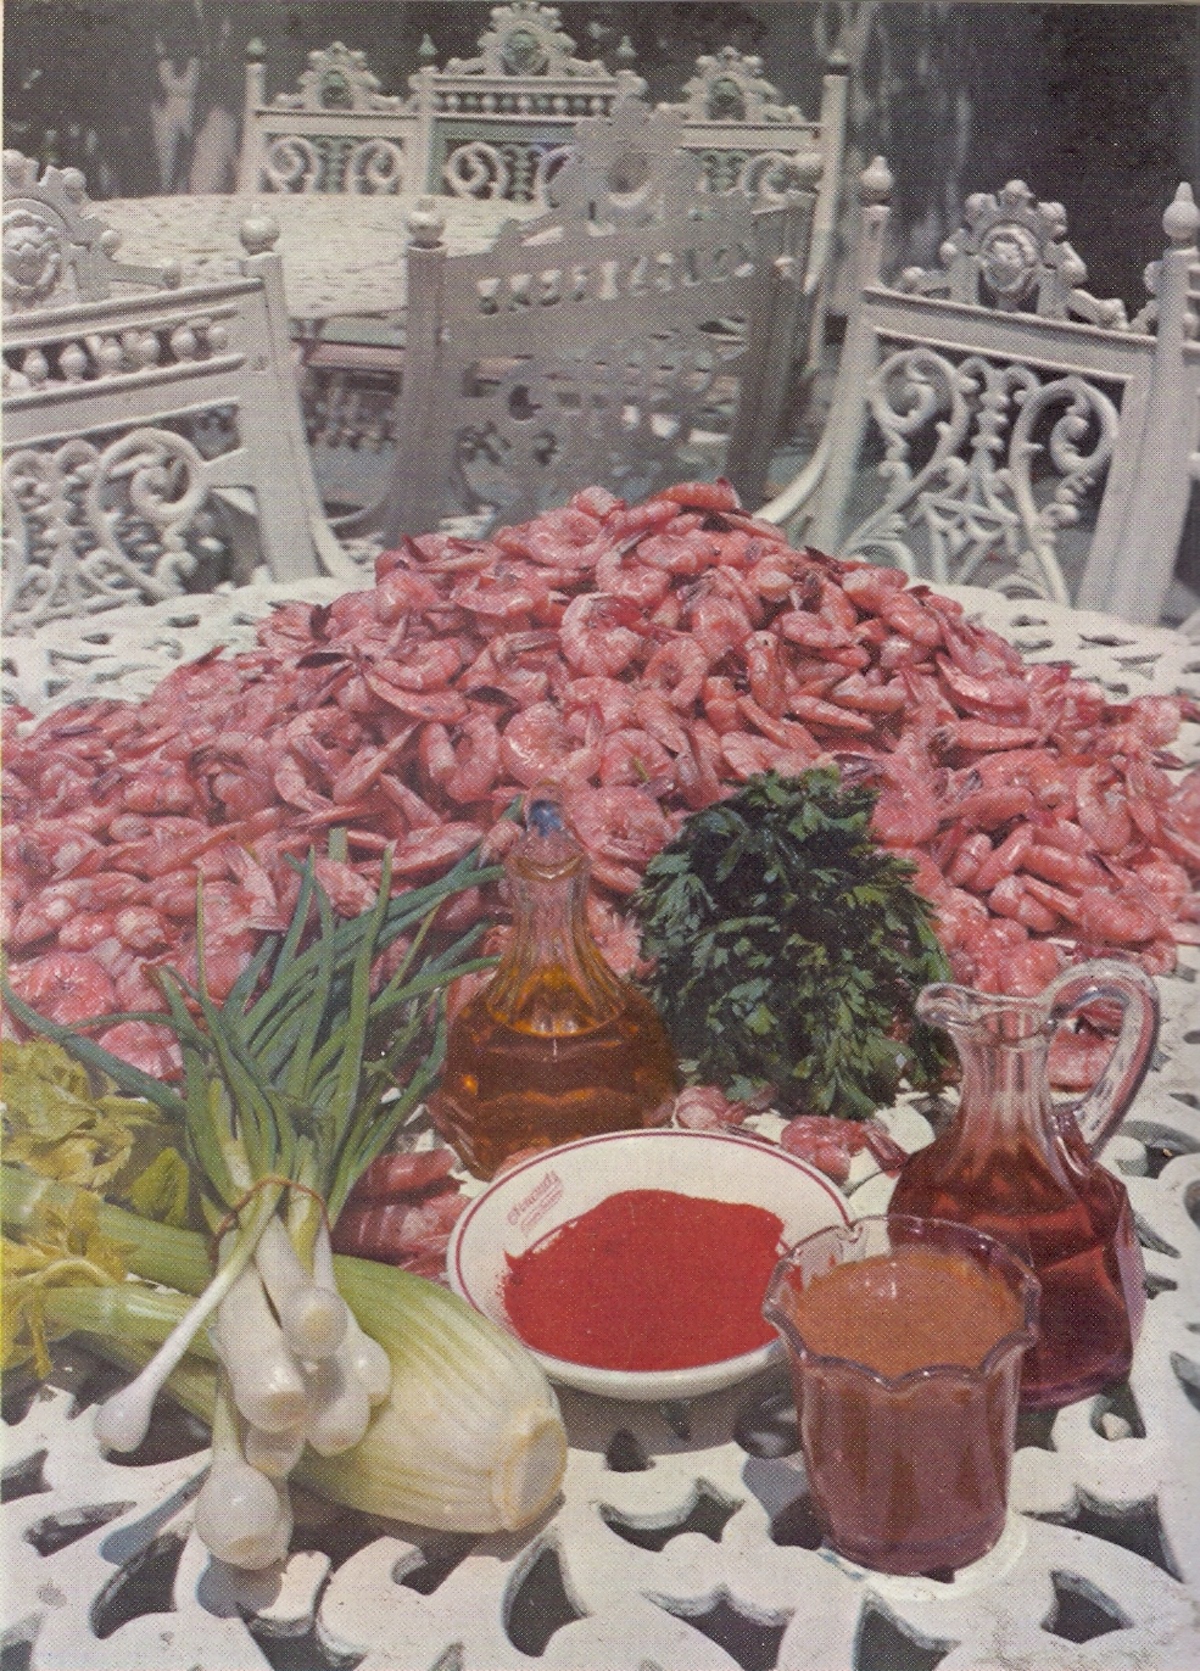 They Are Prawns... But not as we know them...New Orleans, 1958 Life Picture Cookbook